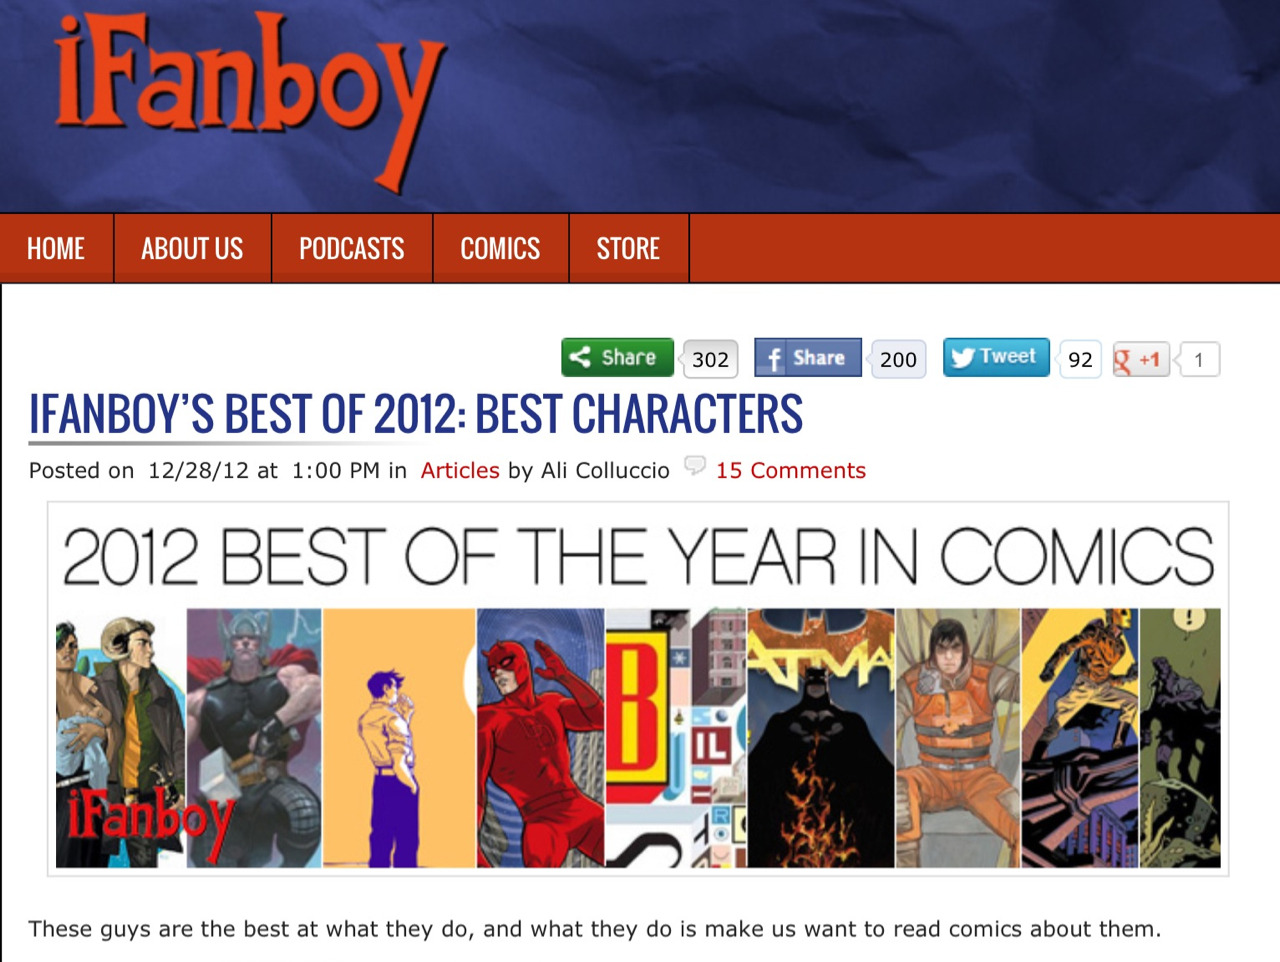 The Li'l Depressed Boy made it into the top ten of iFanboy’s Best Characters of 2012.
http://ifanboy.com/articles/ifanboys-best-of-2012-best-characters/